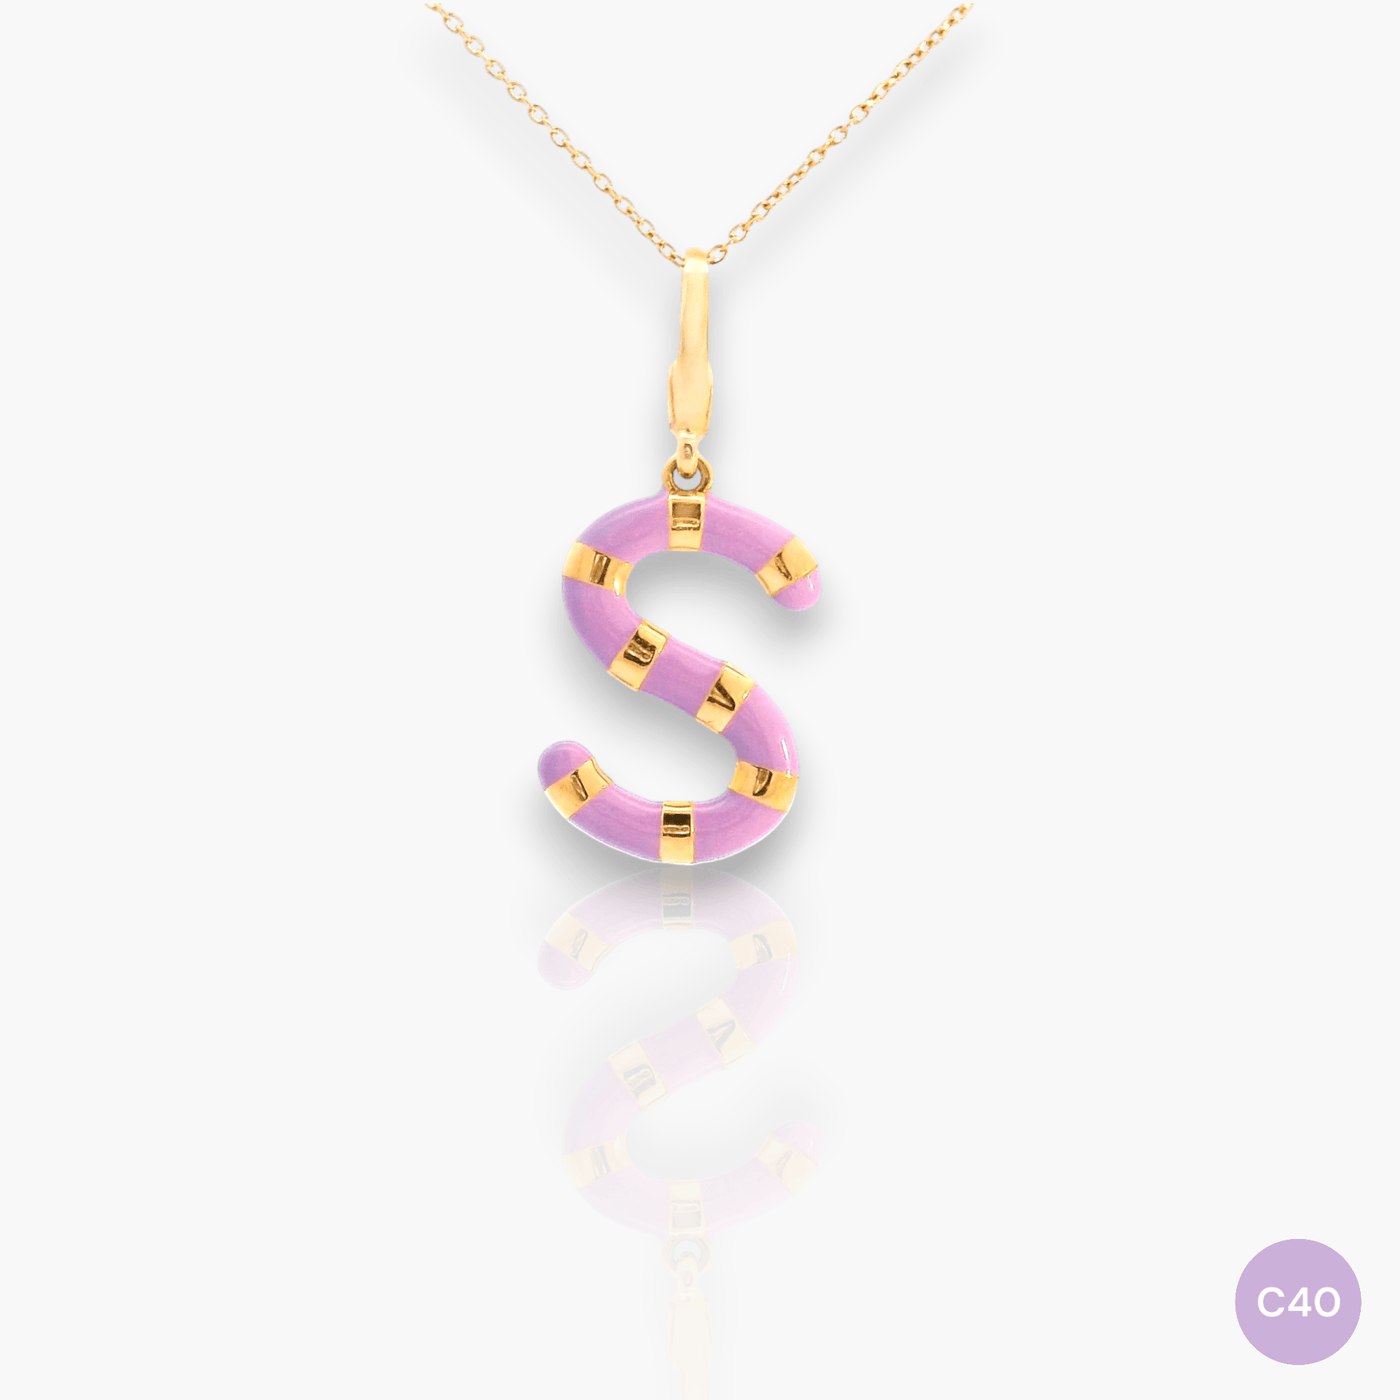 Customizable 20mm letter pendant/chain with Enamel (60+ colors) - Moregola Fine Jewelry